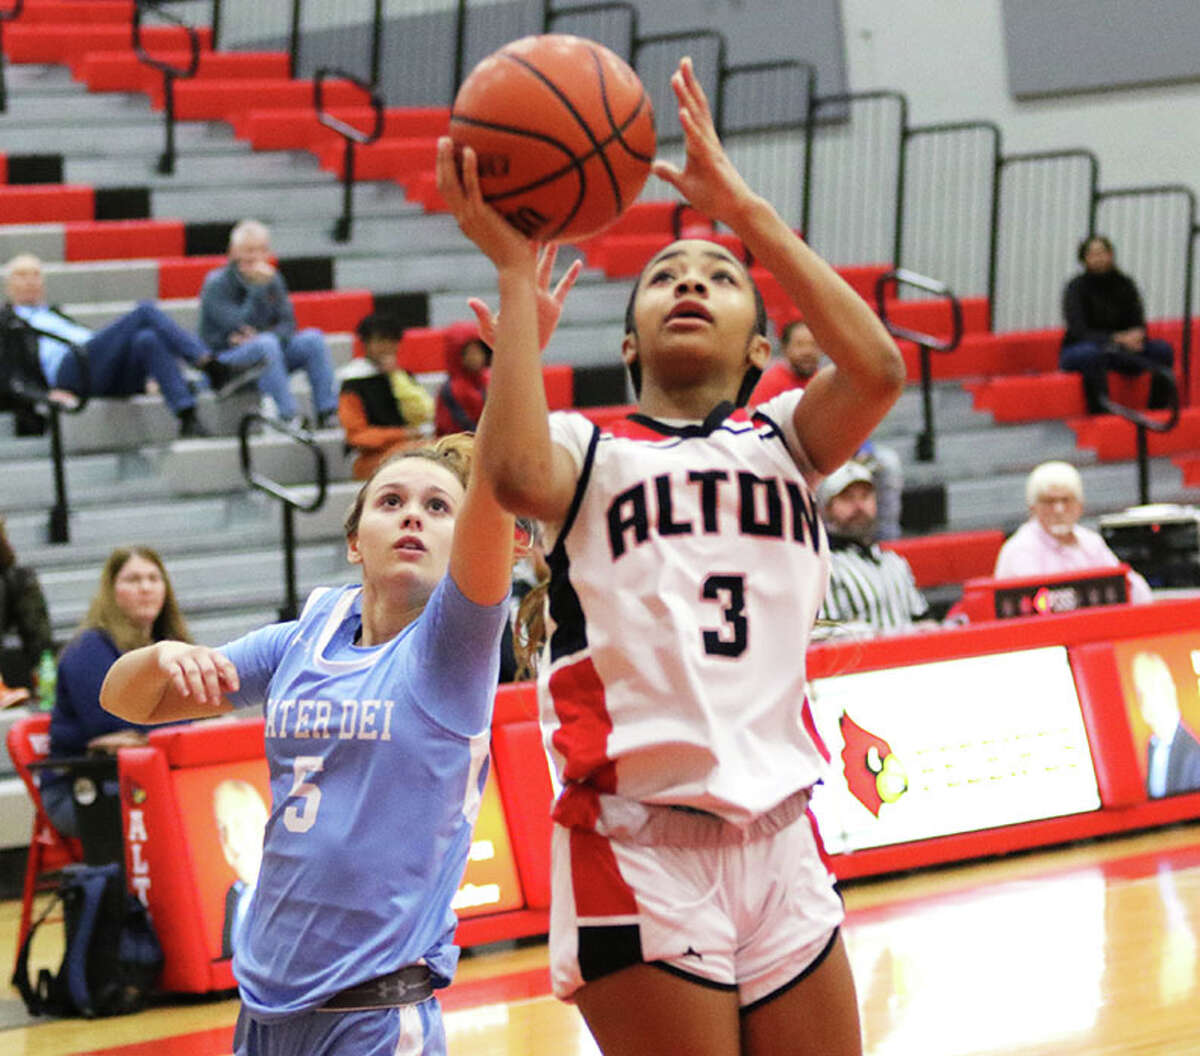 Alton's Kiyoko Proctor (3) goes up for two of her 15 points after getting past Breese Mater Dei's Madison Winkeler in the Alton Tournament on Saturday night in Godfrey.